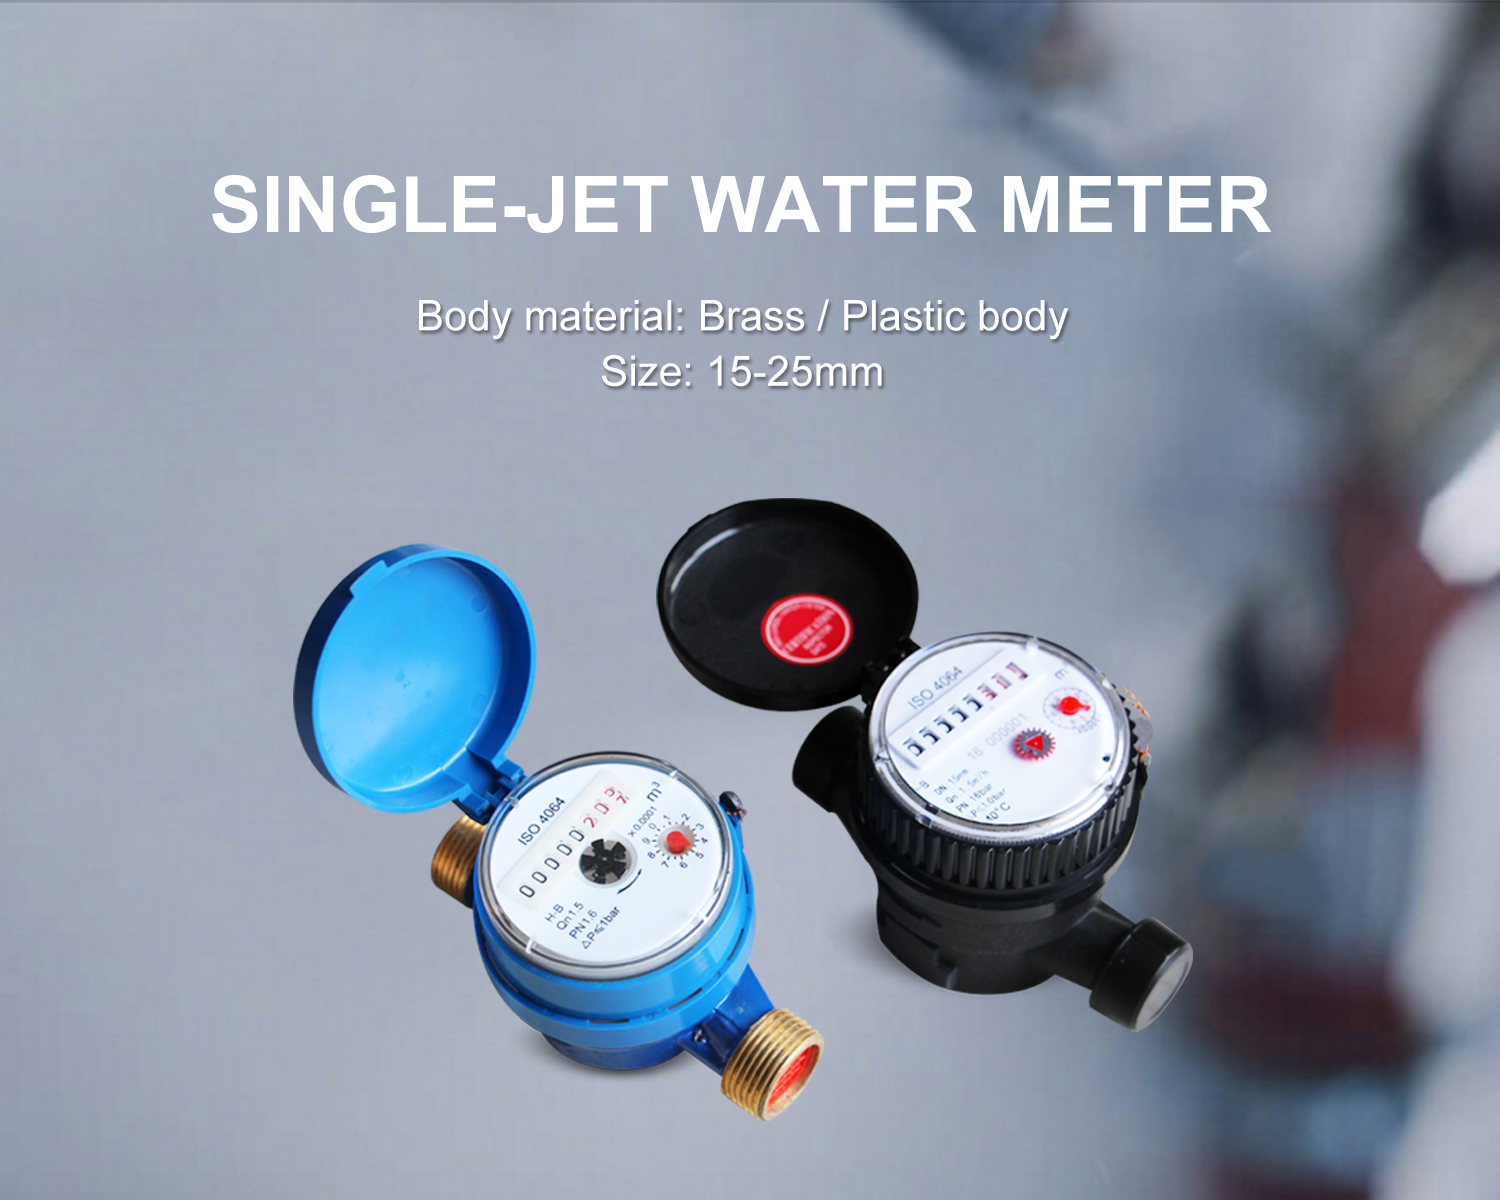 Why is a single jet water meter an accurate choice for measuring water flow?